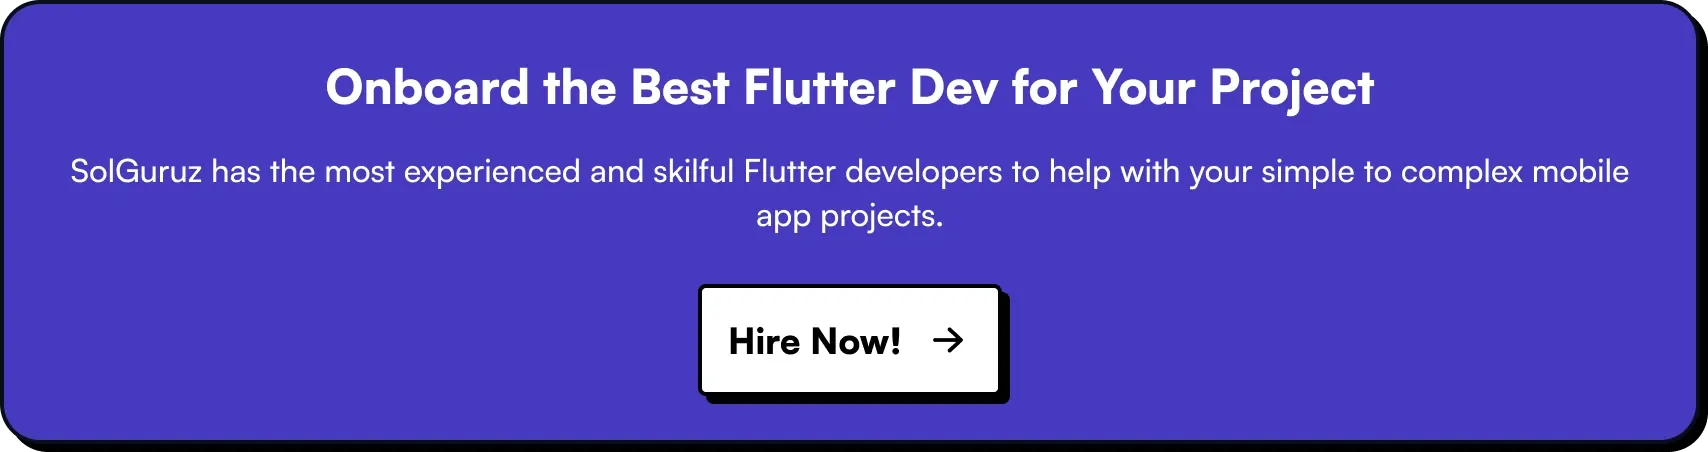 Onboard the Best Flutter Dev for Your Project. SolGuruz has the most experienced and skilful Flutter developers to help with your simple to complex mobile app projects. Hire expert flutter developers now!